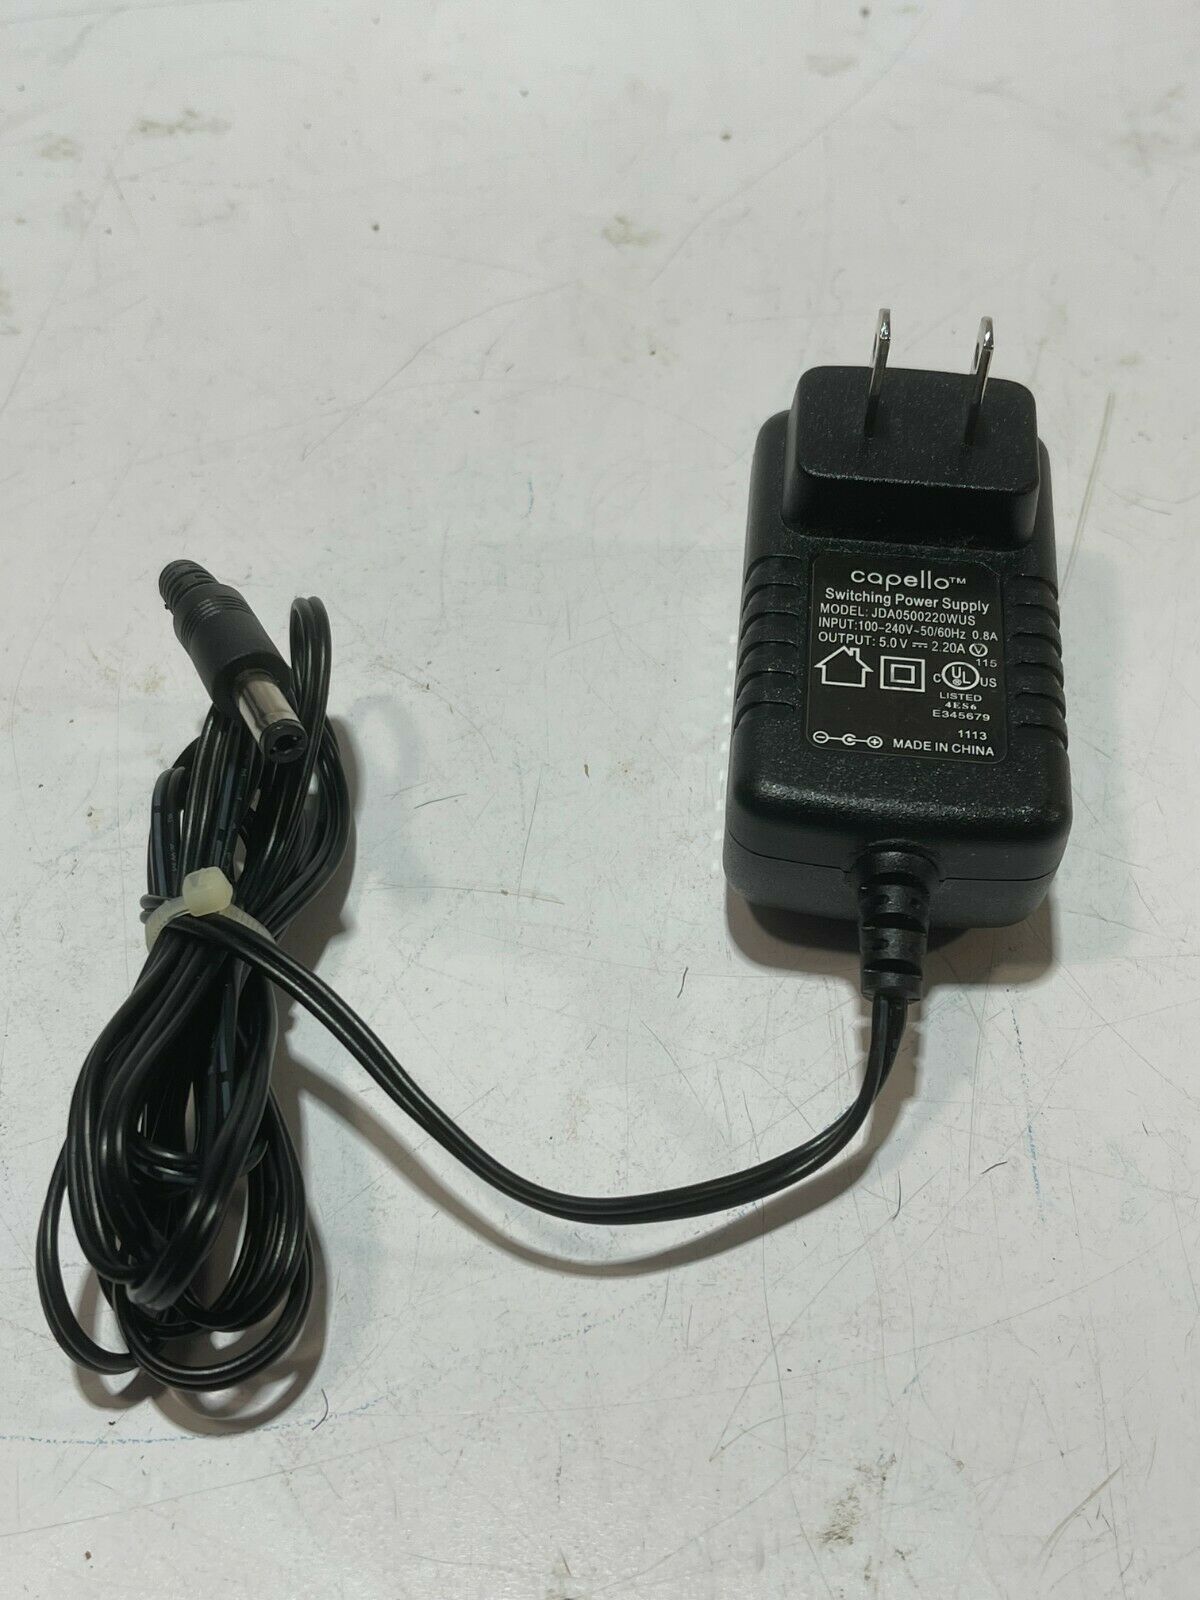 Capello JDA0500250WUS Power Supply AC Adapter DC 5.0V 2.50A Country/Region of Manufacture: China Custom Bundle: No C - Click Image to Close